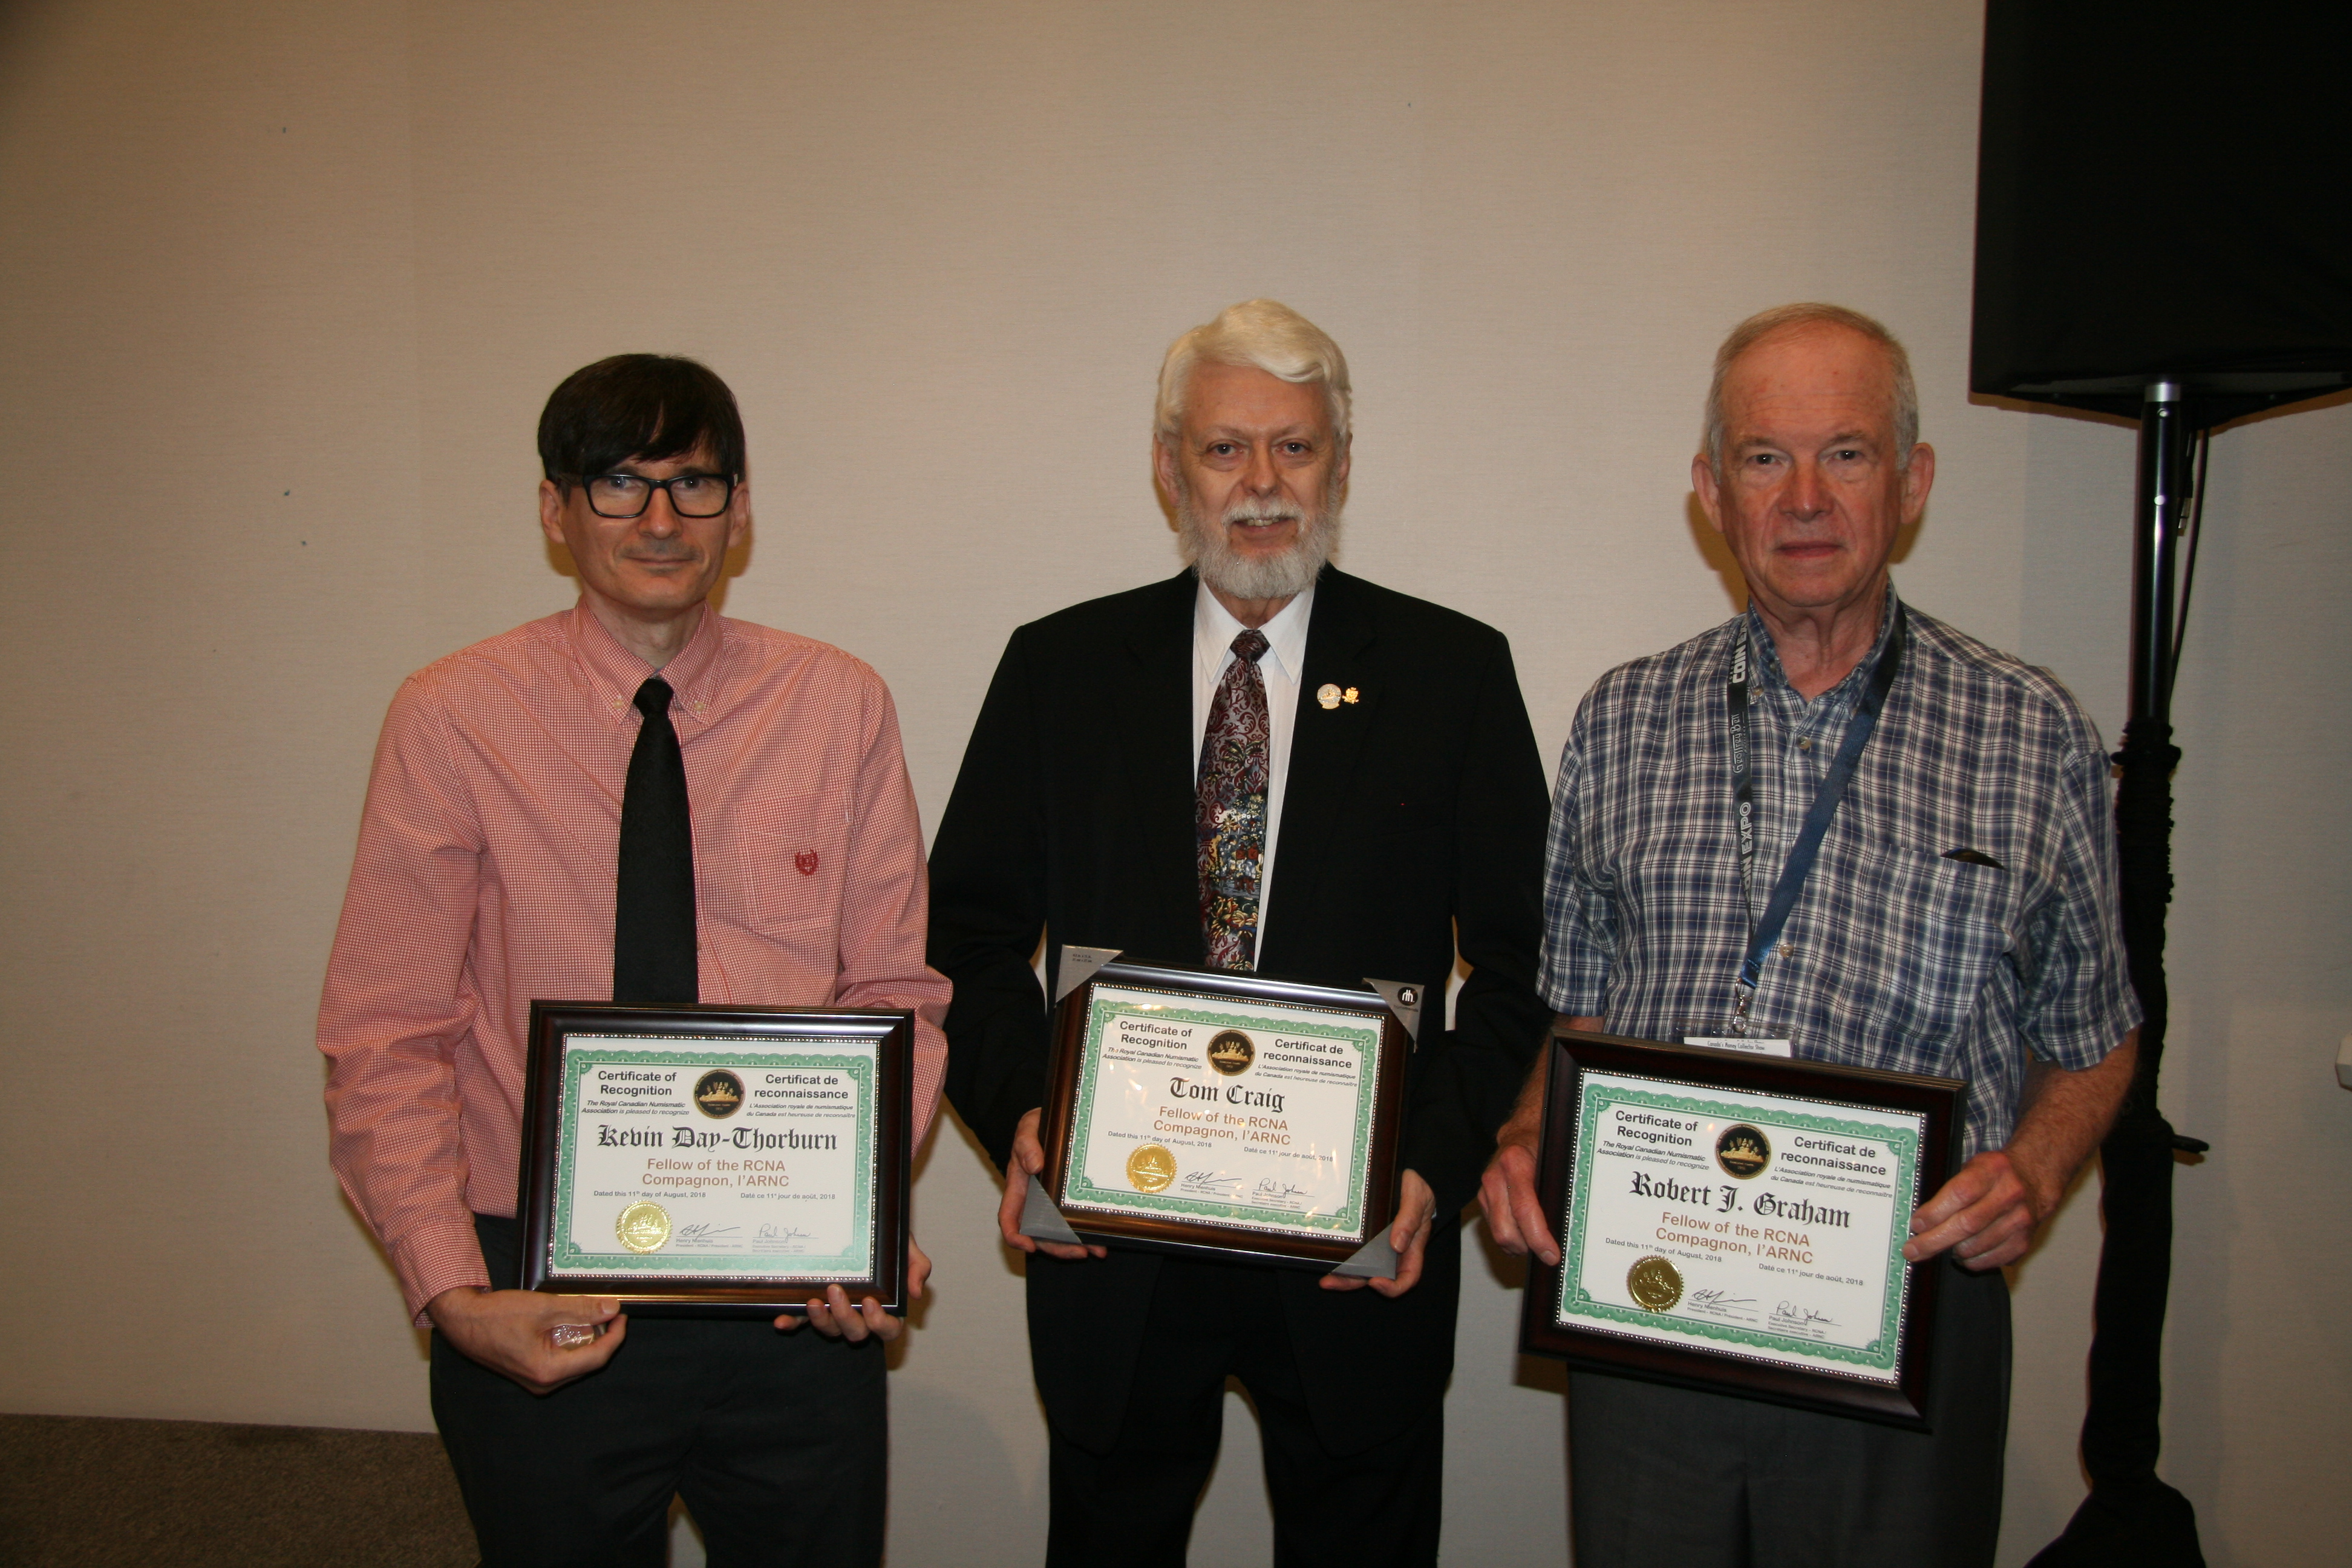 <p><strong>Kevin Day-Thorburn</strong> (left), Paul Petch, accepting for <strong>Tom Craig</strong> (center) and <strong>Bob Graham</strong> (right) receiving their Fellow Awards.<br /> <small>Dan Gosling photo</small></p>